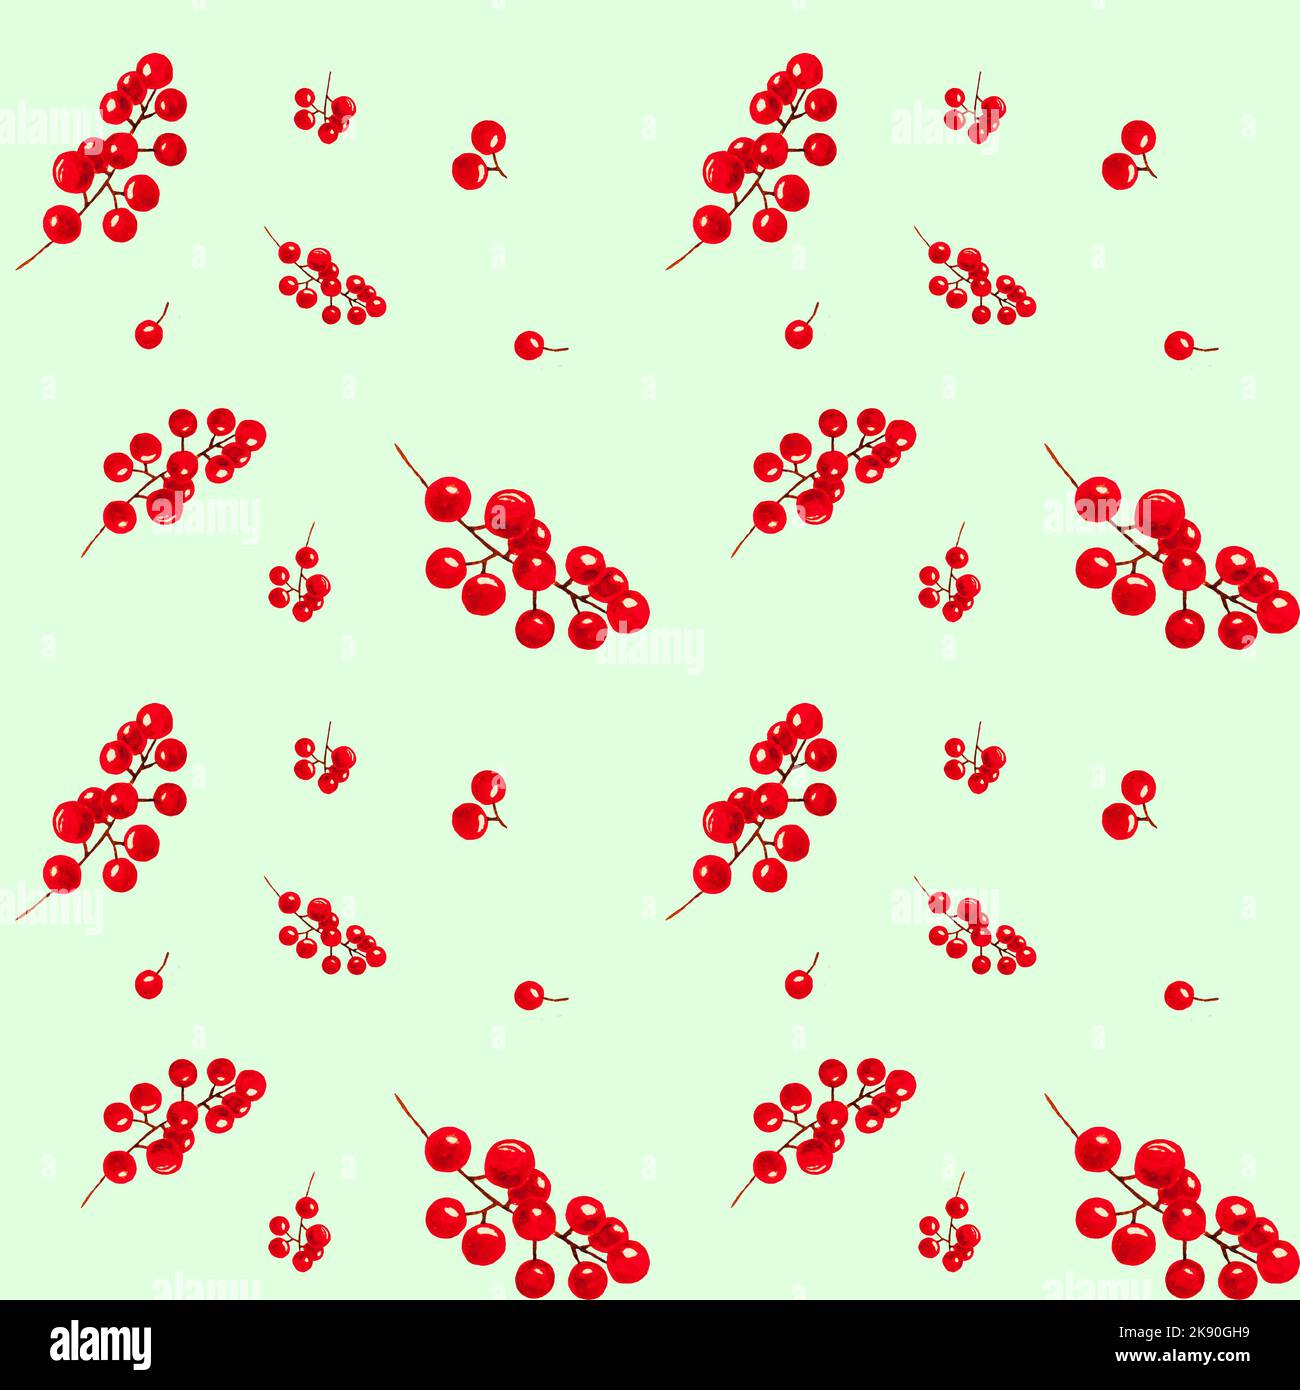 Red berries watercolor background, seamless watercolor pattern with bright red seasonal berries on light green surface, raster seamless illustration Stock Photo